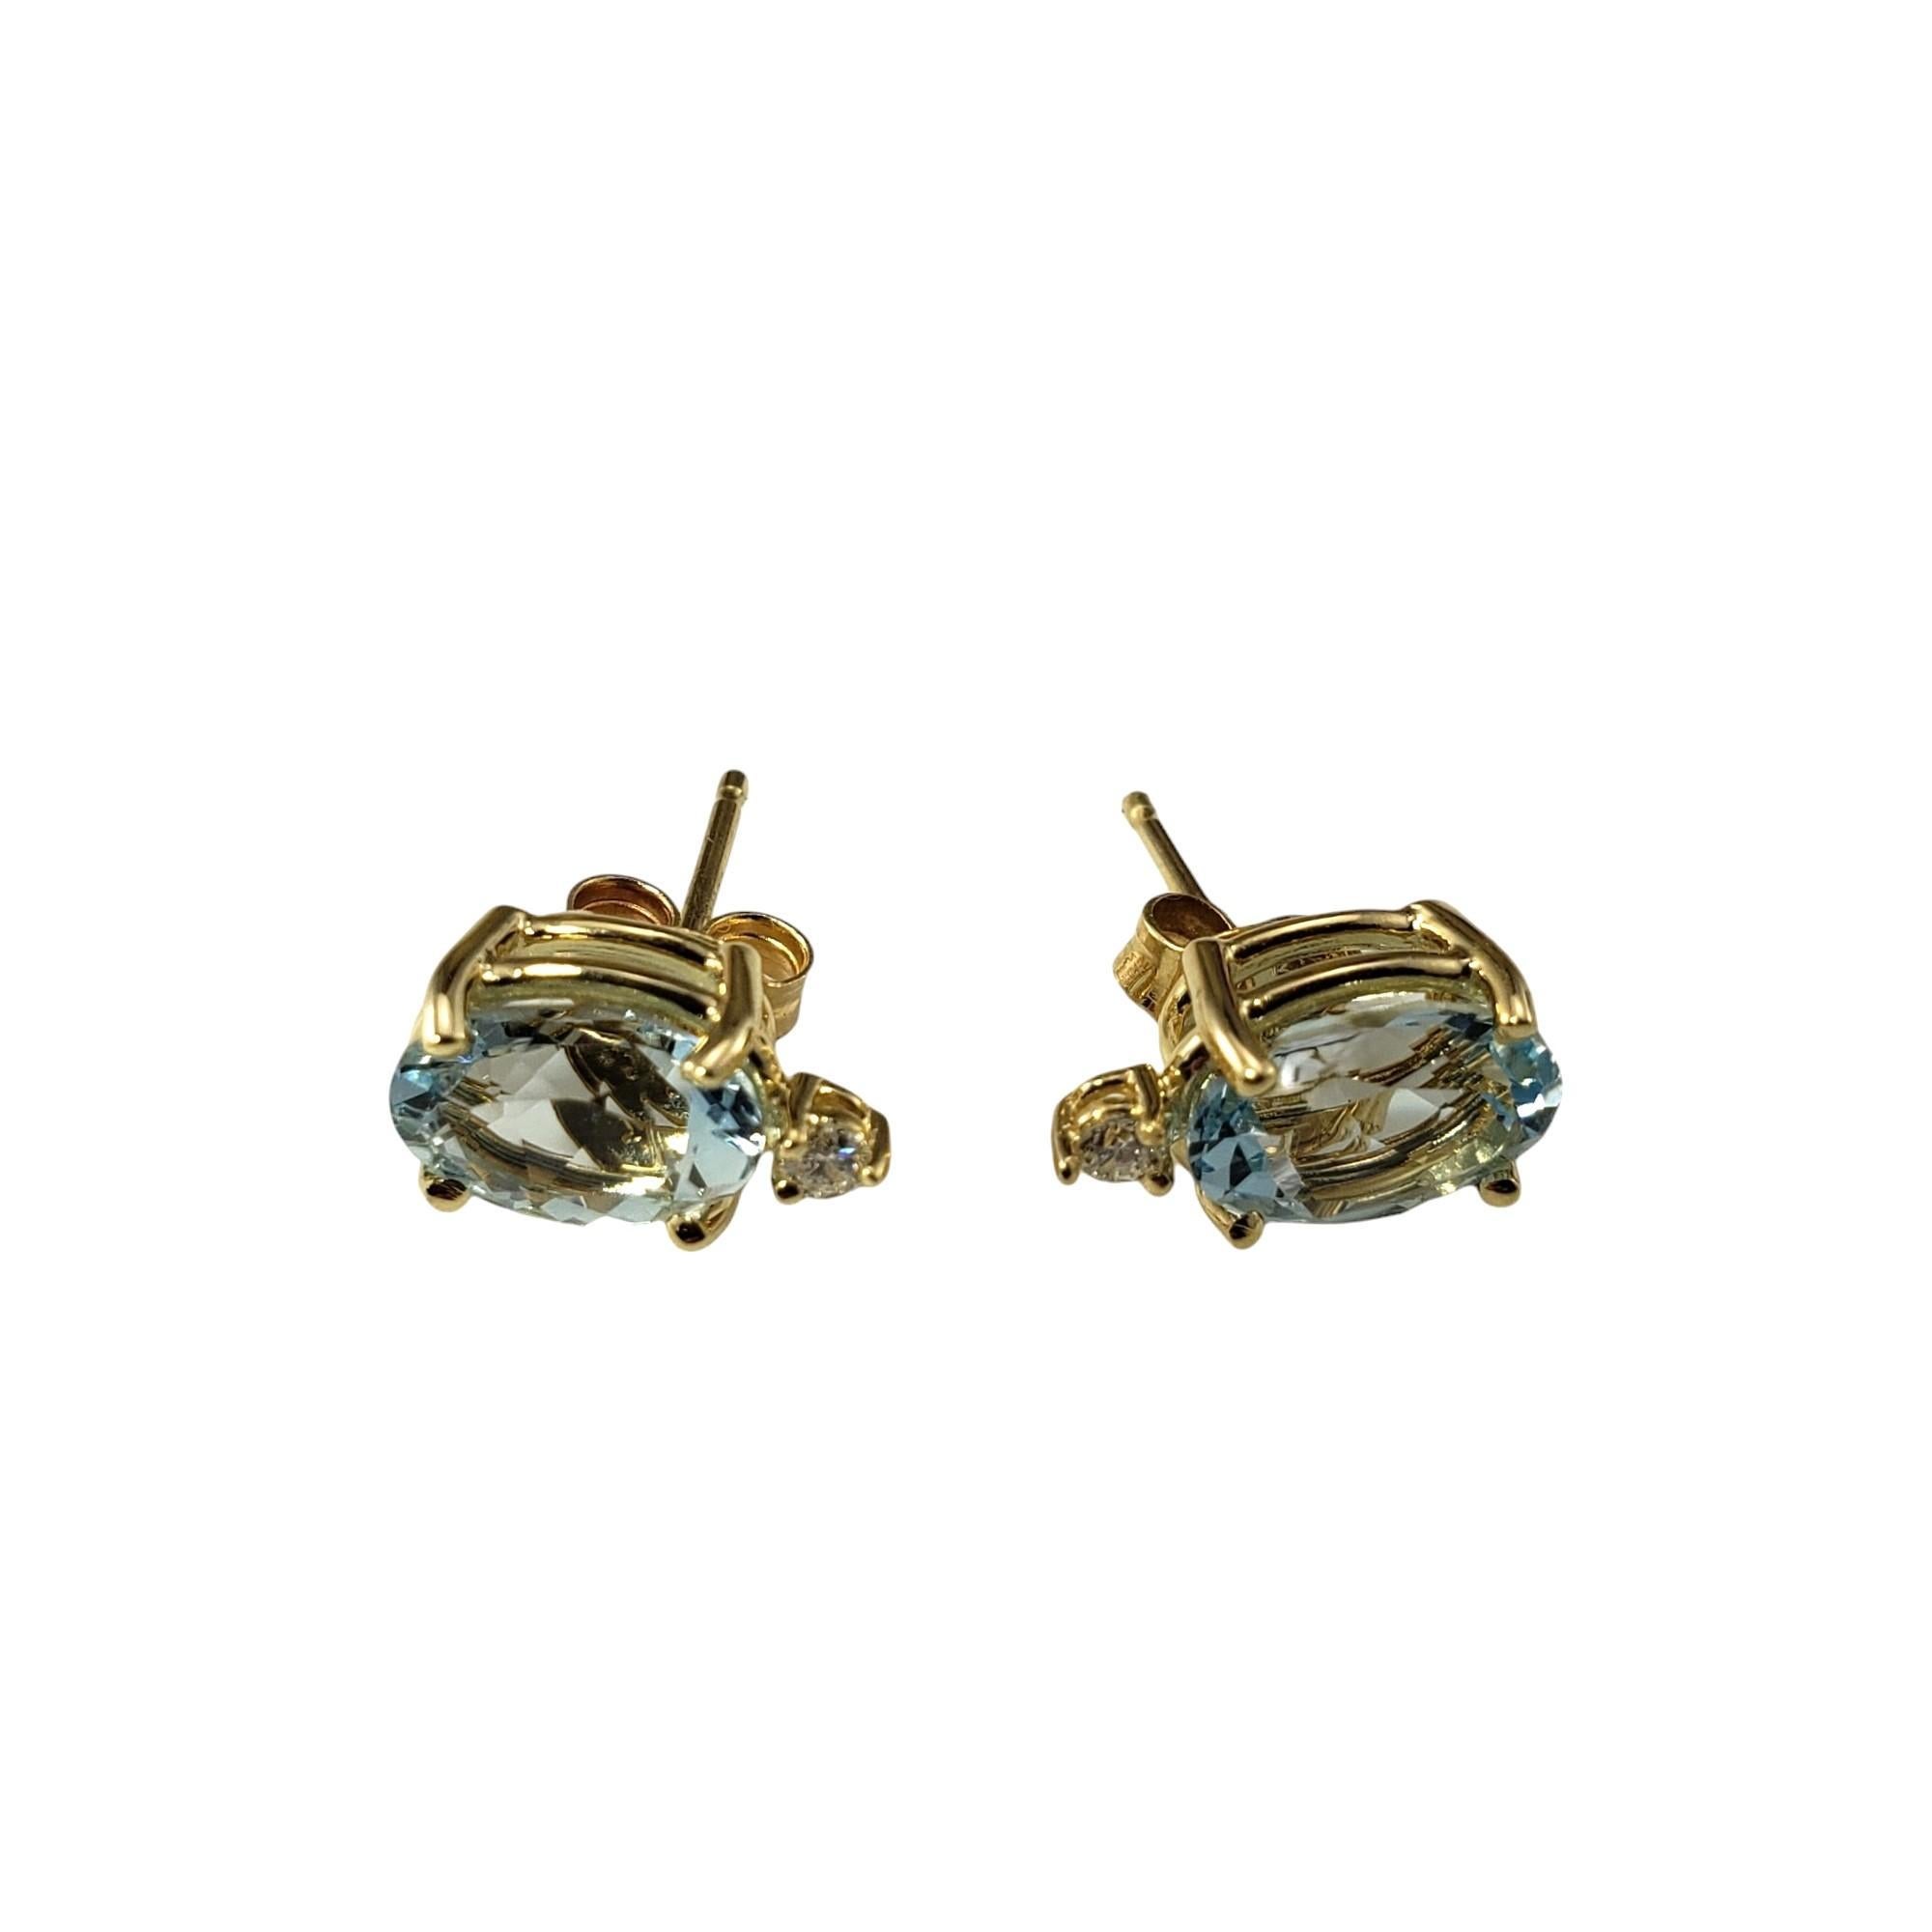 14K Yellow Gold Aquamarine and Diamond Earrings

These elegant earrings each feature one oval aquamarine stone (8 mm x 6 mm) and one round brilliant cut diamond set in classic 14K yellow gold.  

Push back closures.

Approximate total diamond